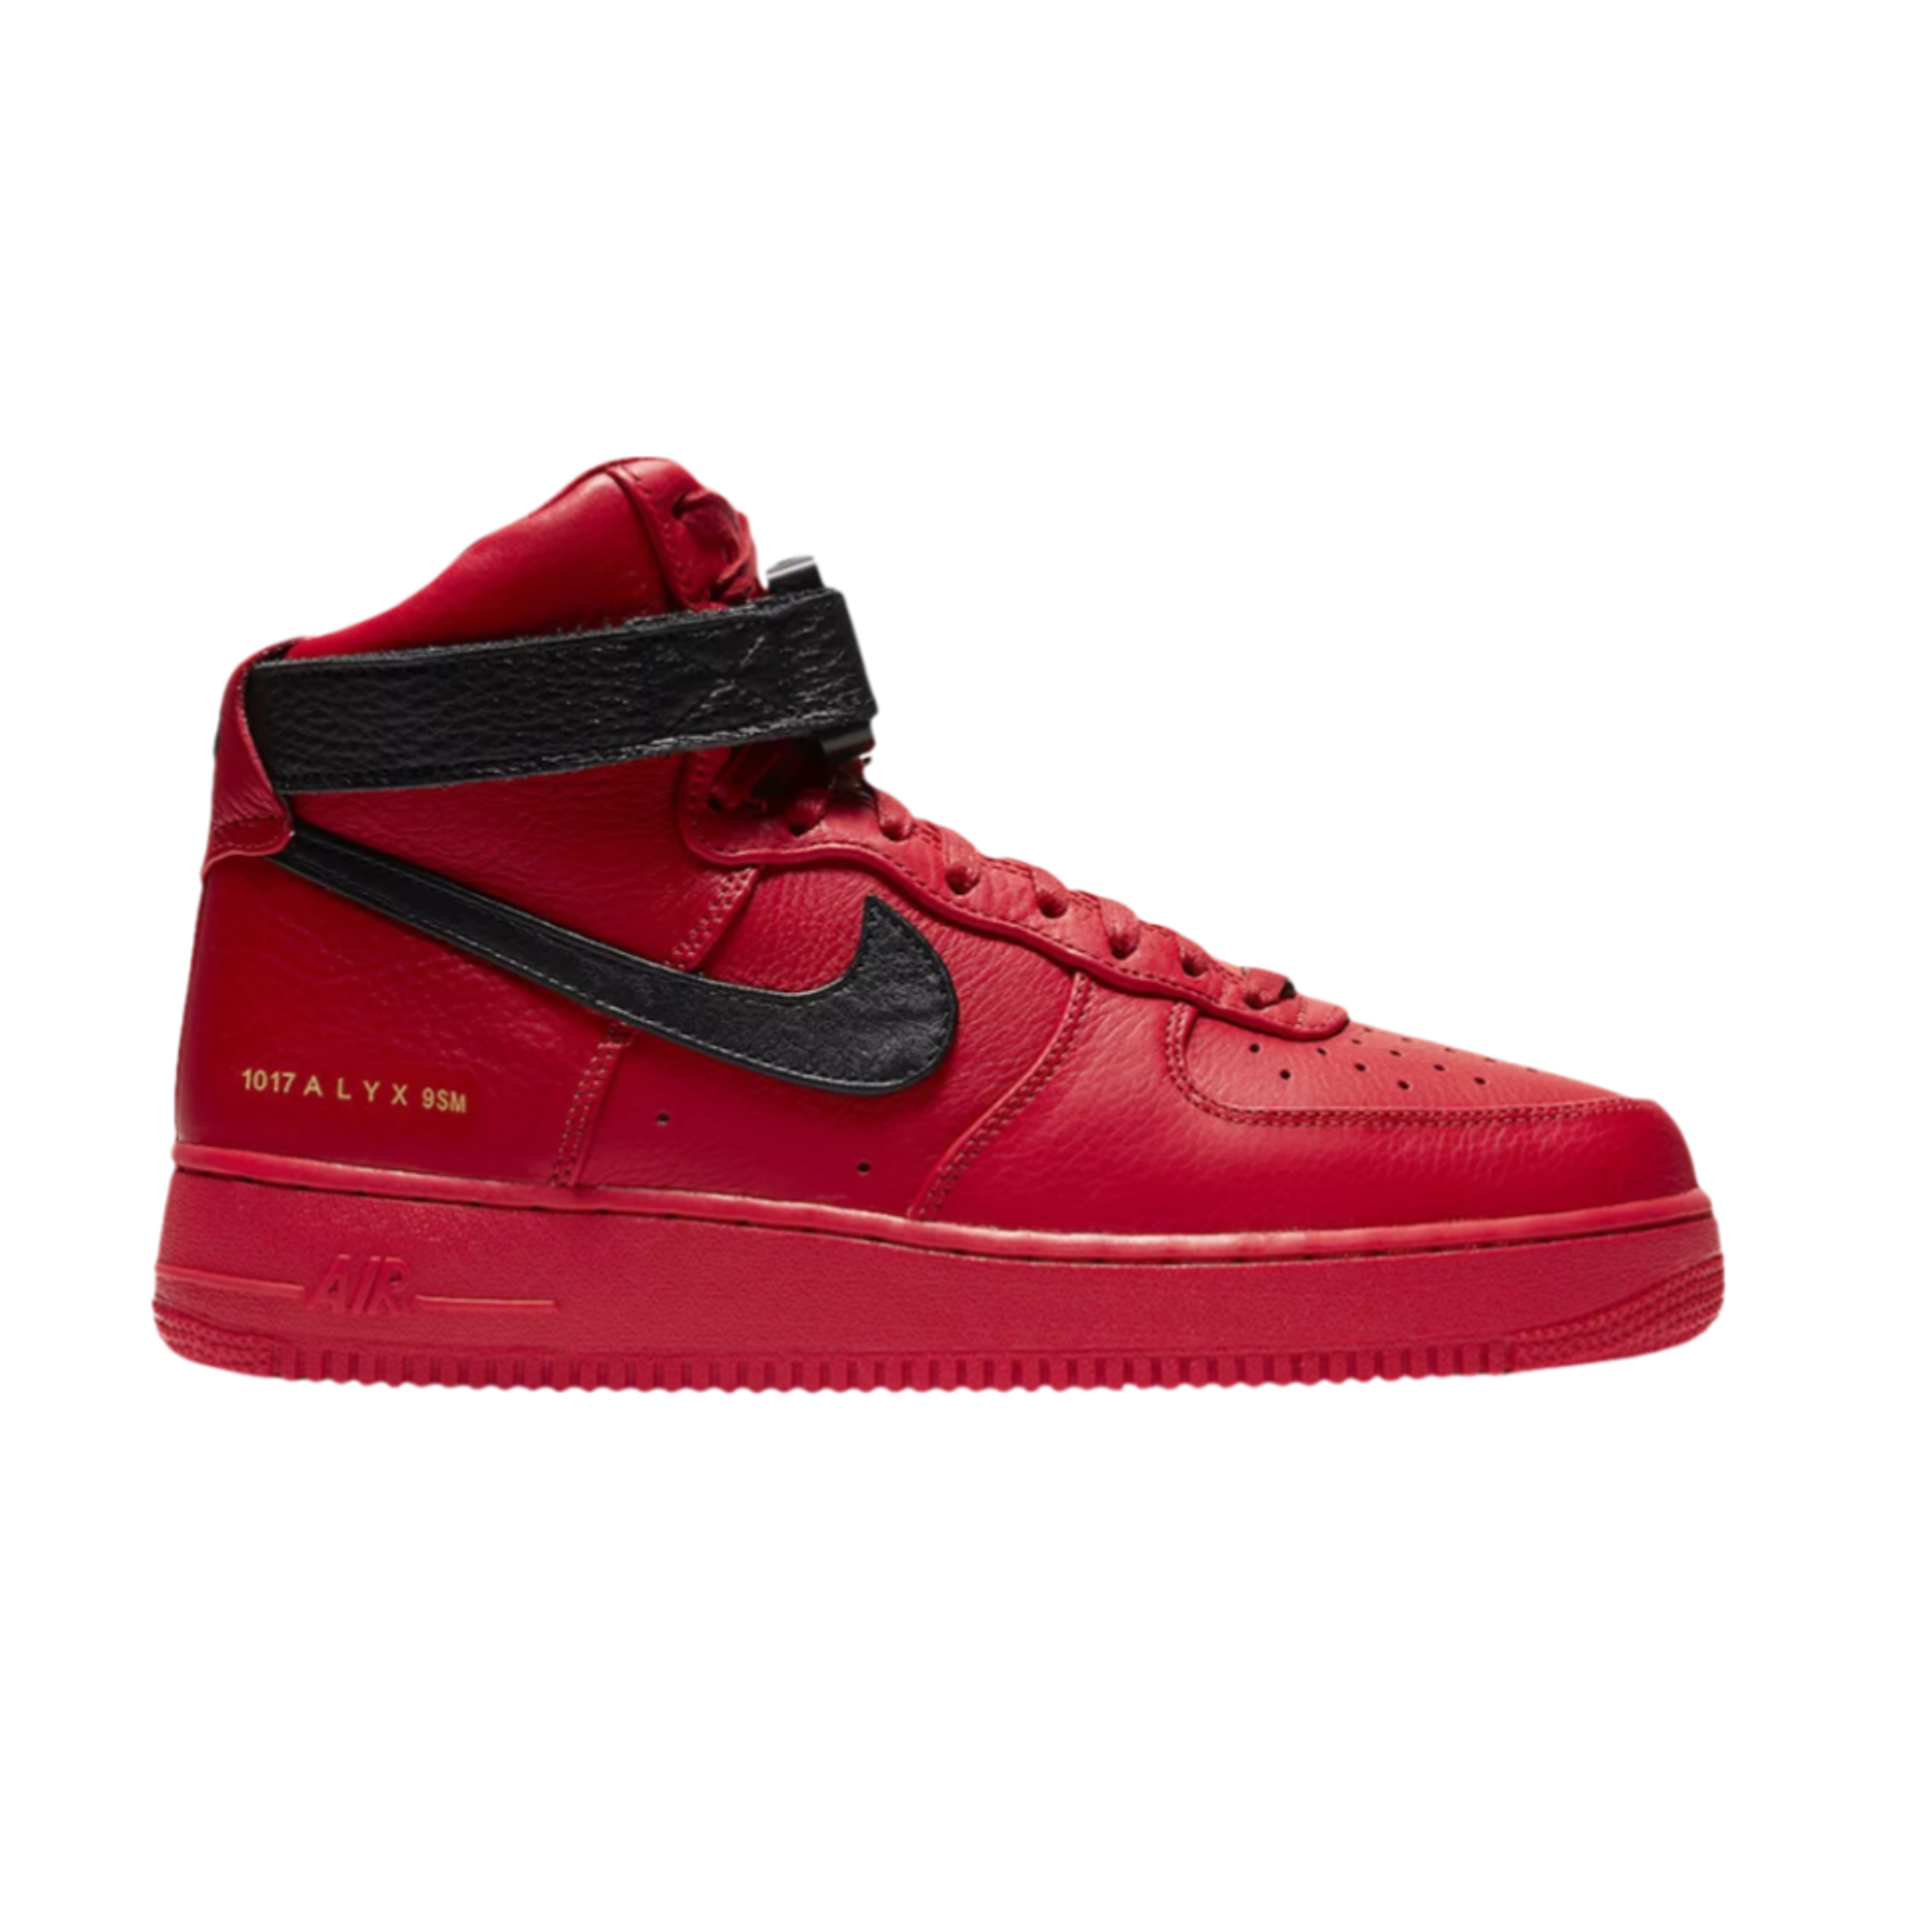 Nike 1017 ALYX 9SM x Air Force 1 High 'University Red'